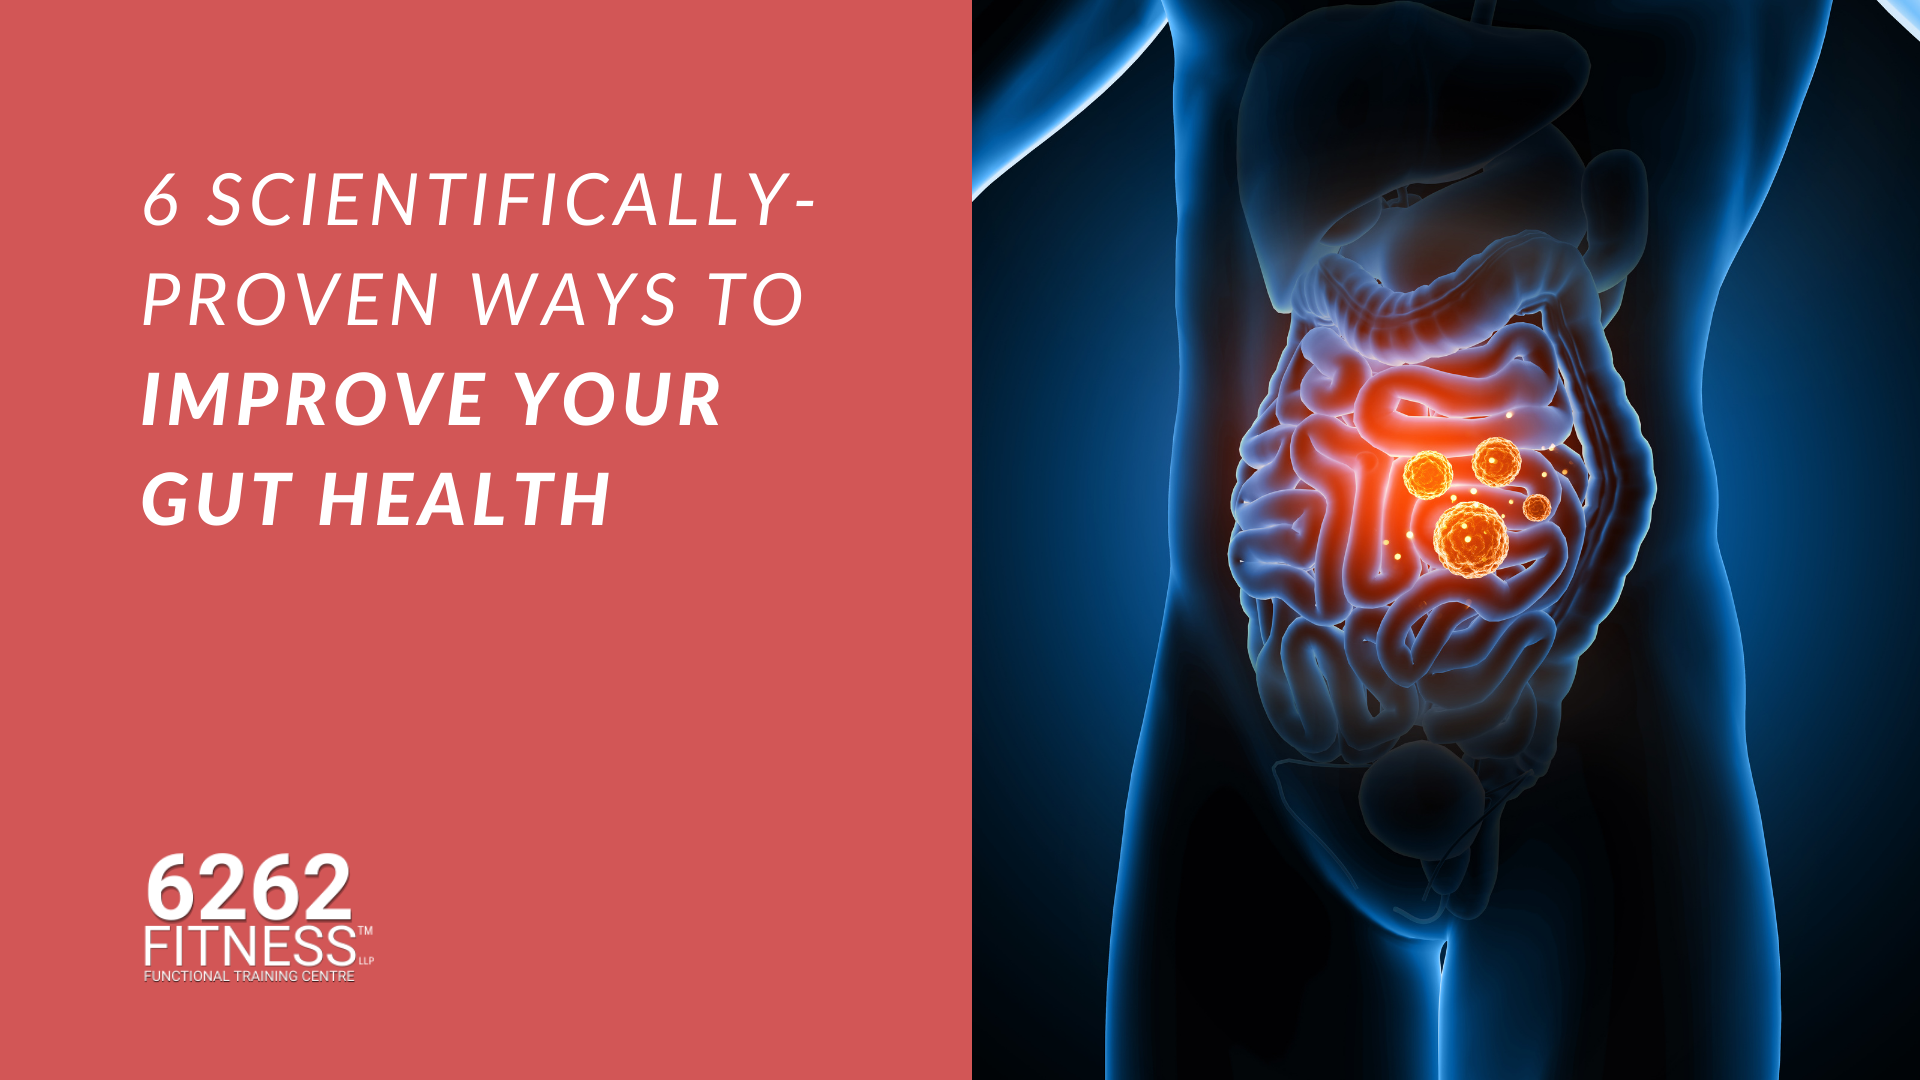 6 scientifically-proven ways to improve your gut health